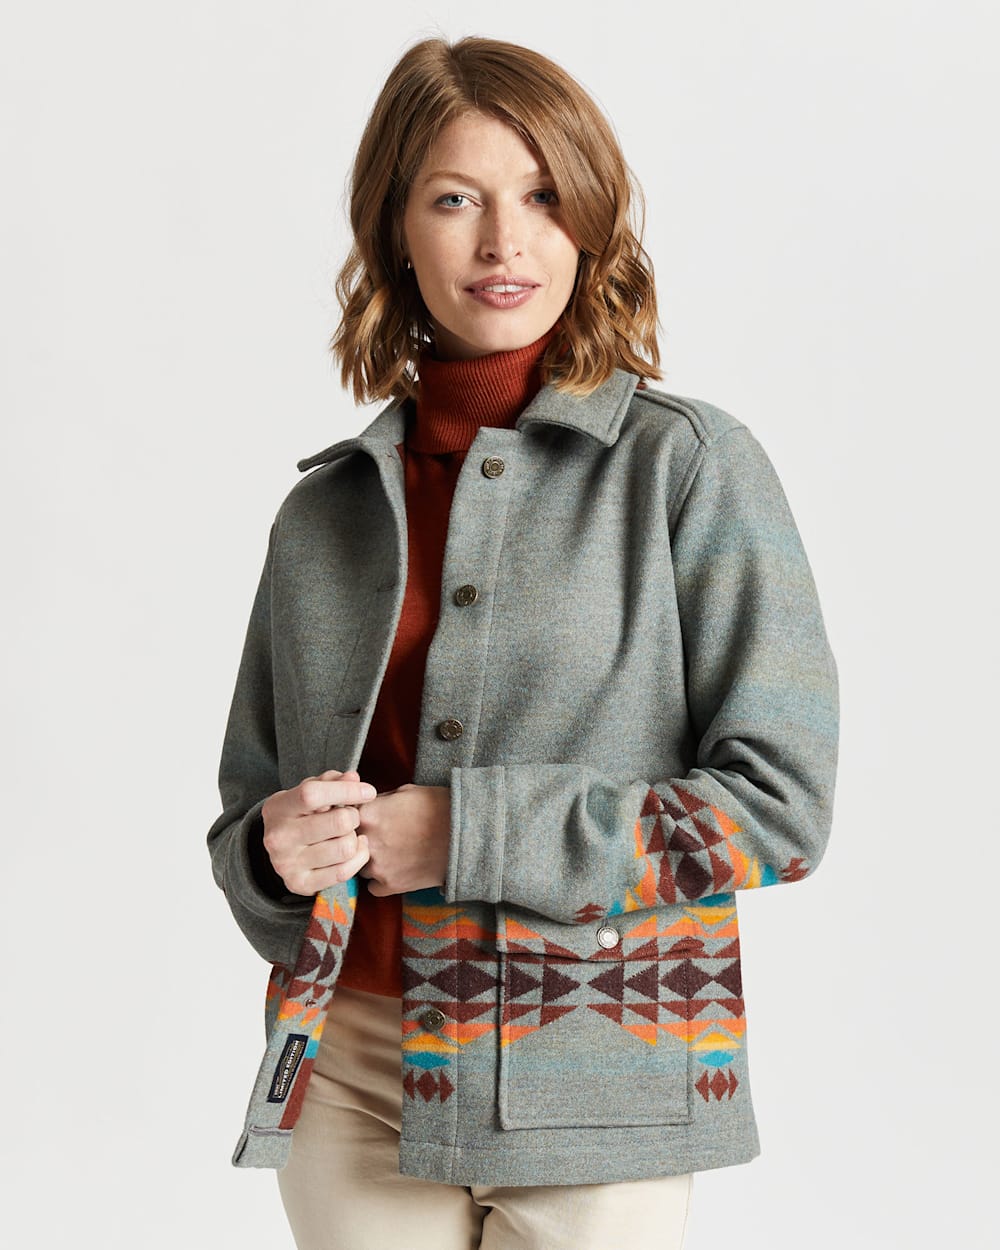 ALTERNATE VIEW OF WOMEN'S WESTERN HORIZONS COAT IN BLUE CRESCENT BUTTE image number 6